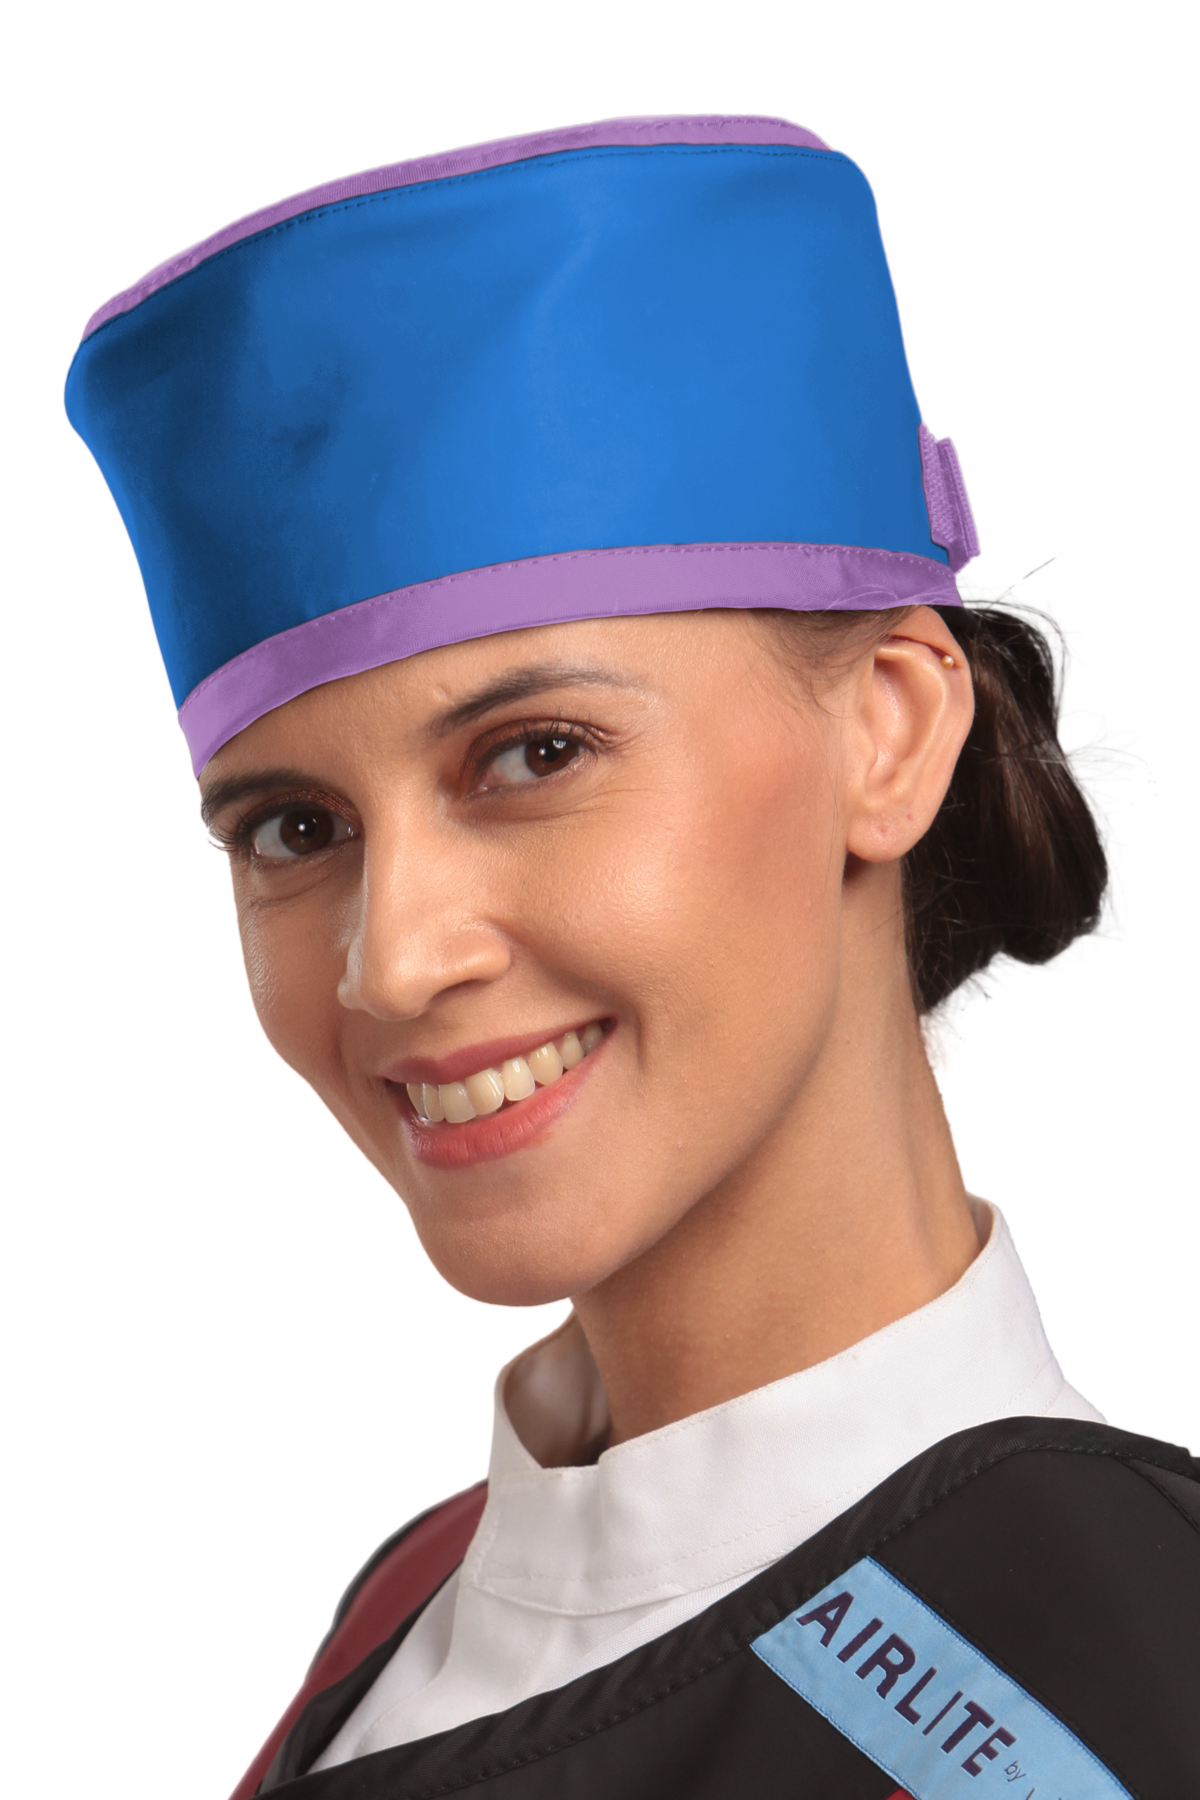 Up-close left-side frontal view of a female model wearing a radiation protection head shield. The head shield is Electric blue with lilac-colored lines around the lower and upper edges.